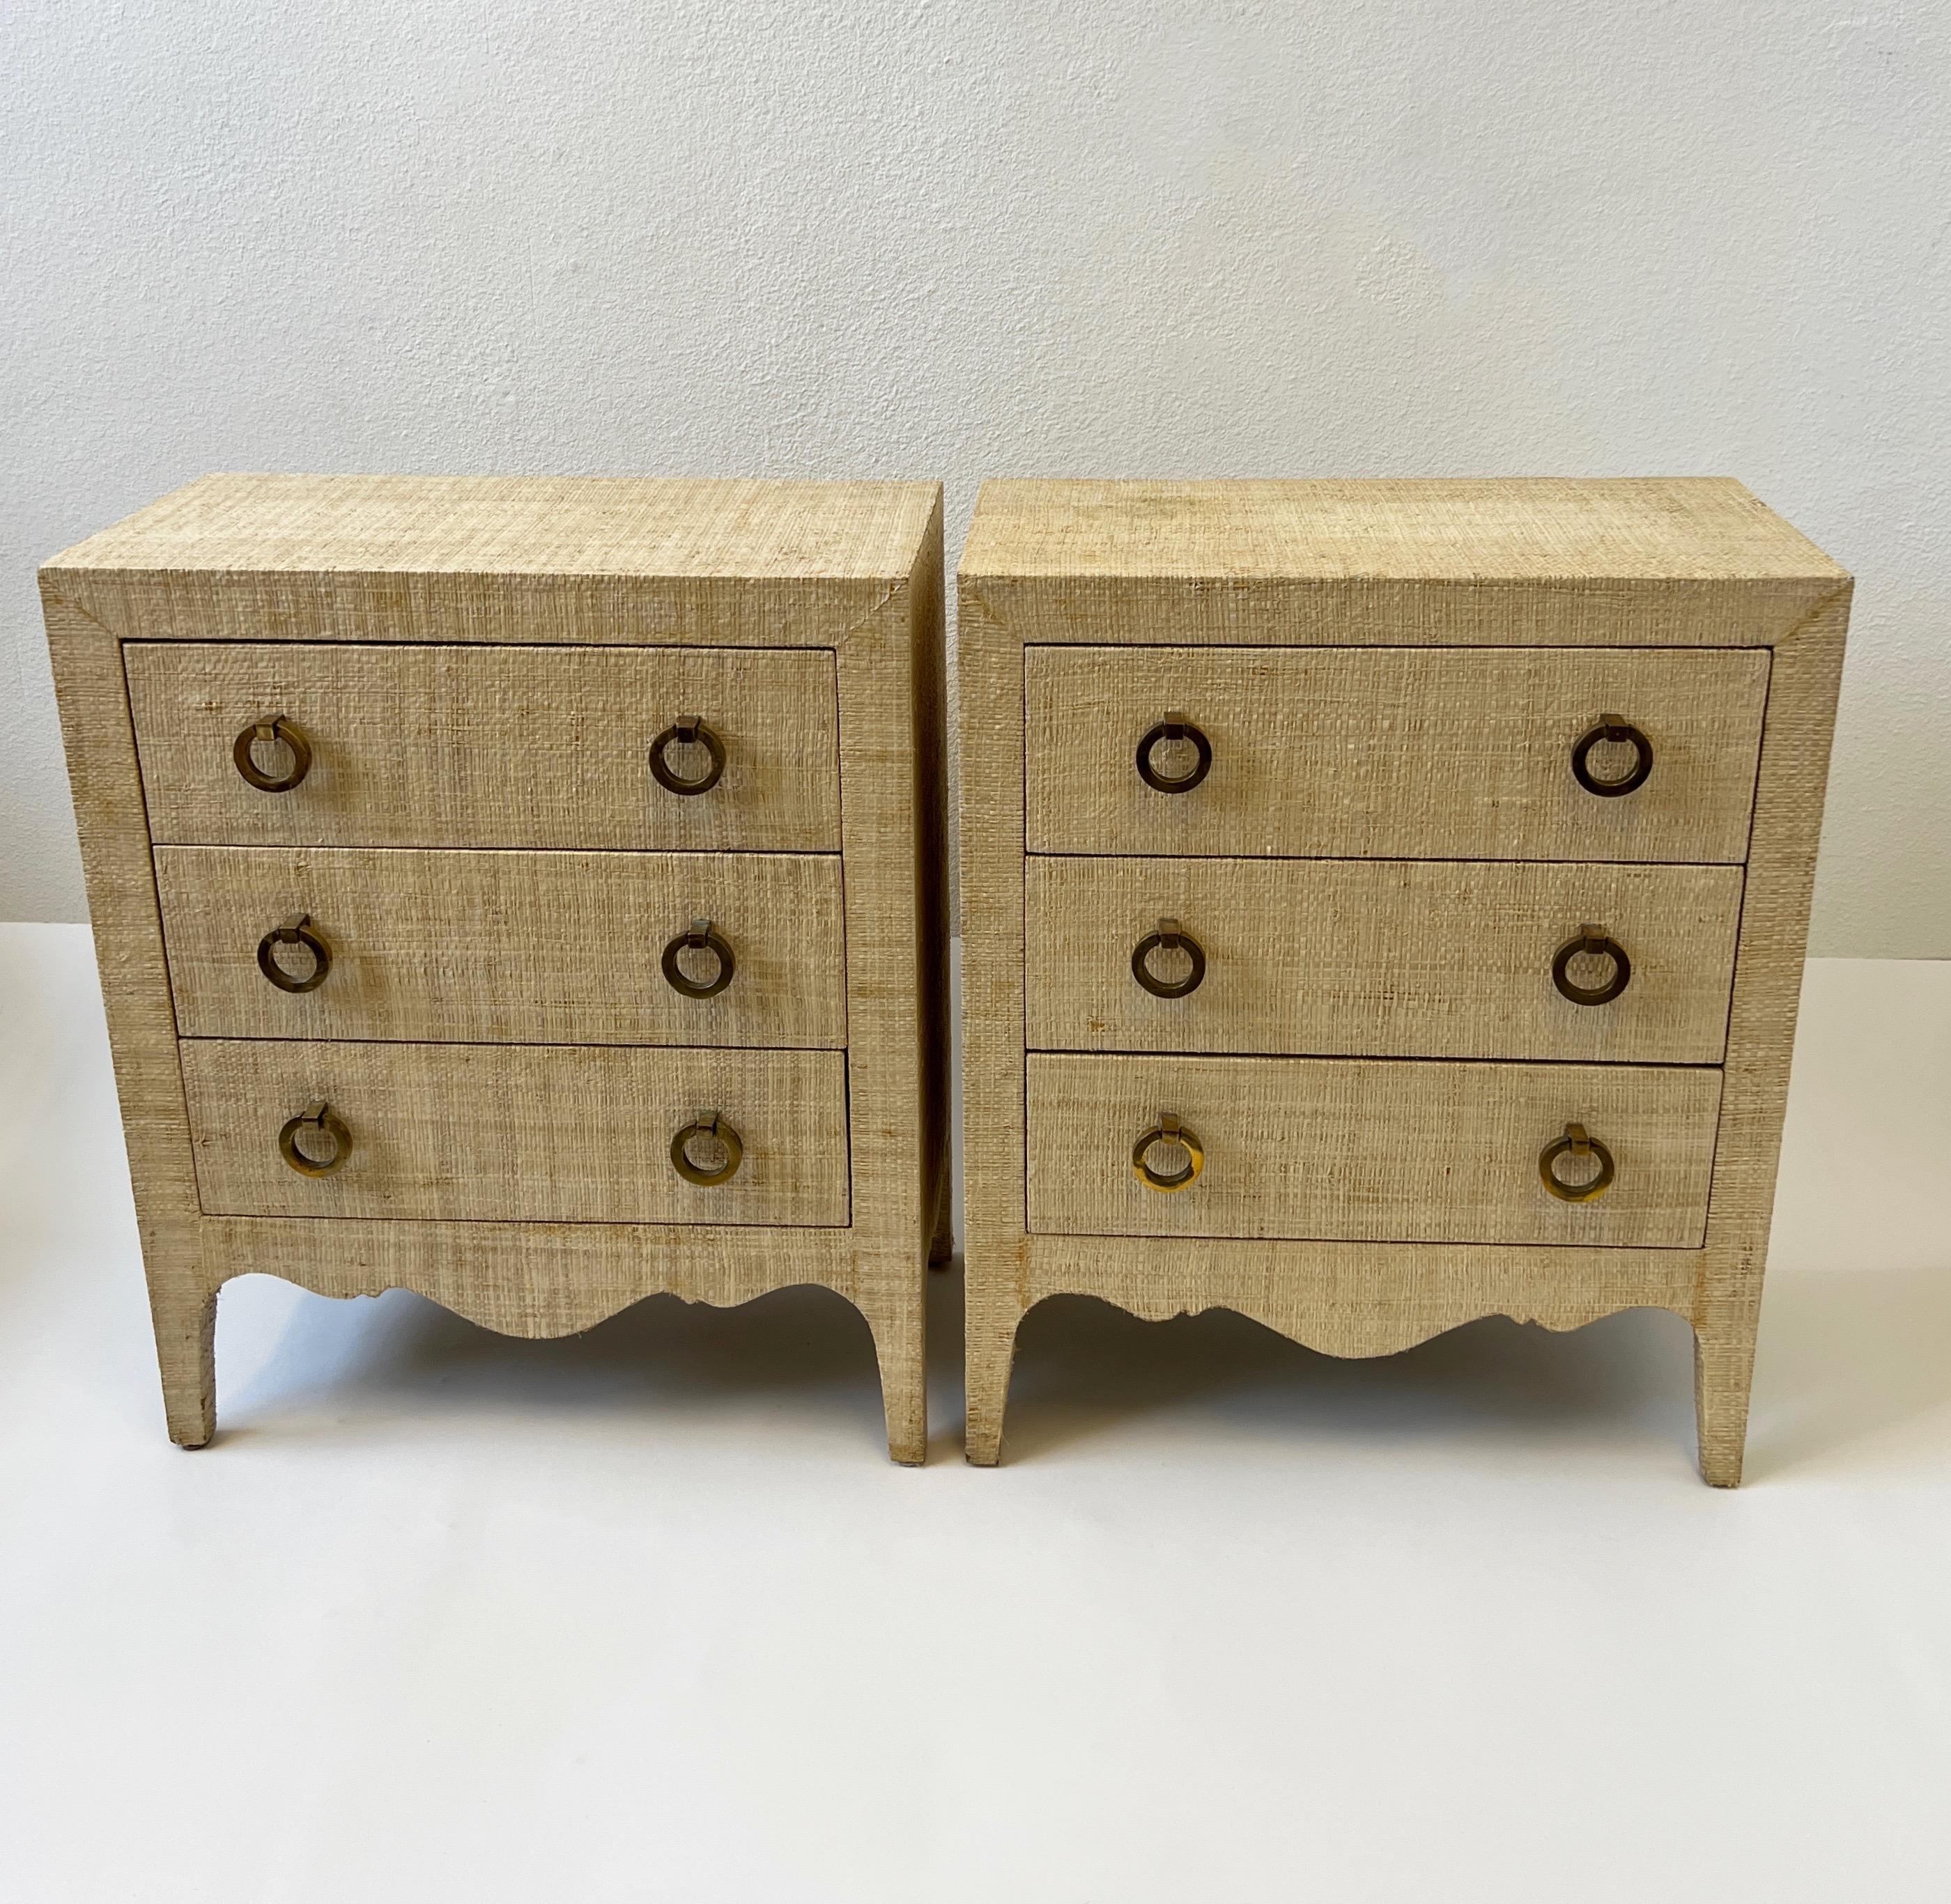 Pair of 1980’s grasscloth and brass night stands in the style of Harrison Van Horn. 
Constructed of solid wood covered with natural grasscloth and solid brass pulls. 
They show some wear consistent with age and use. 

Measurements: 13” Deep,